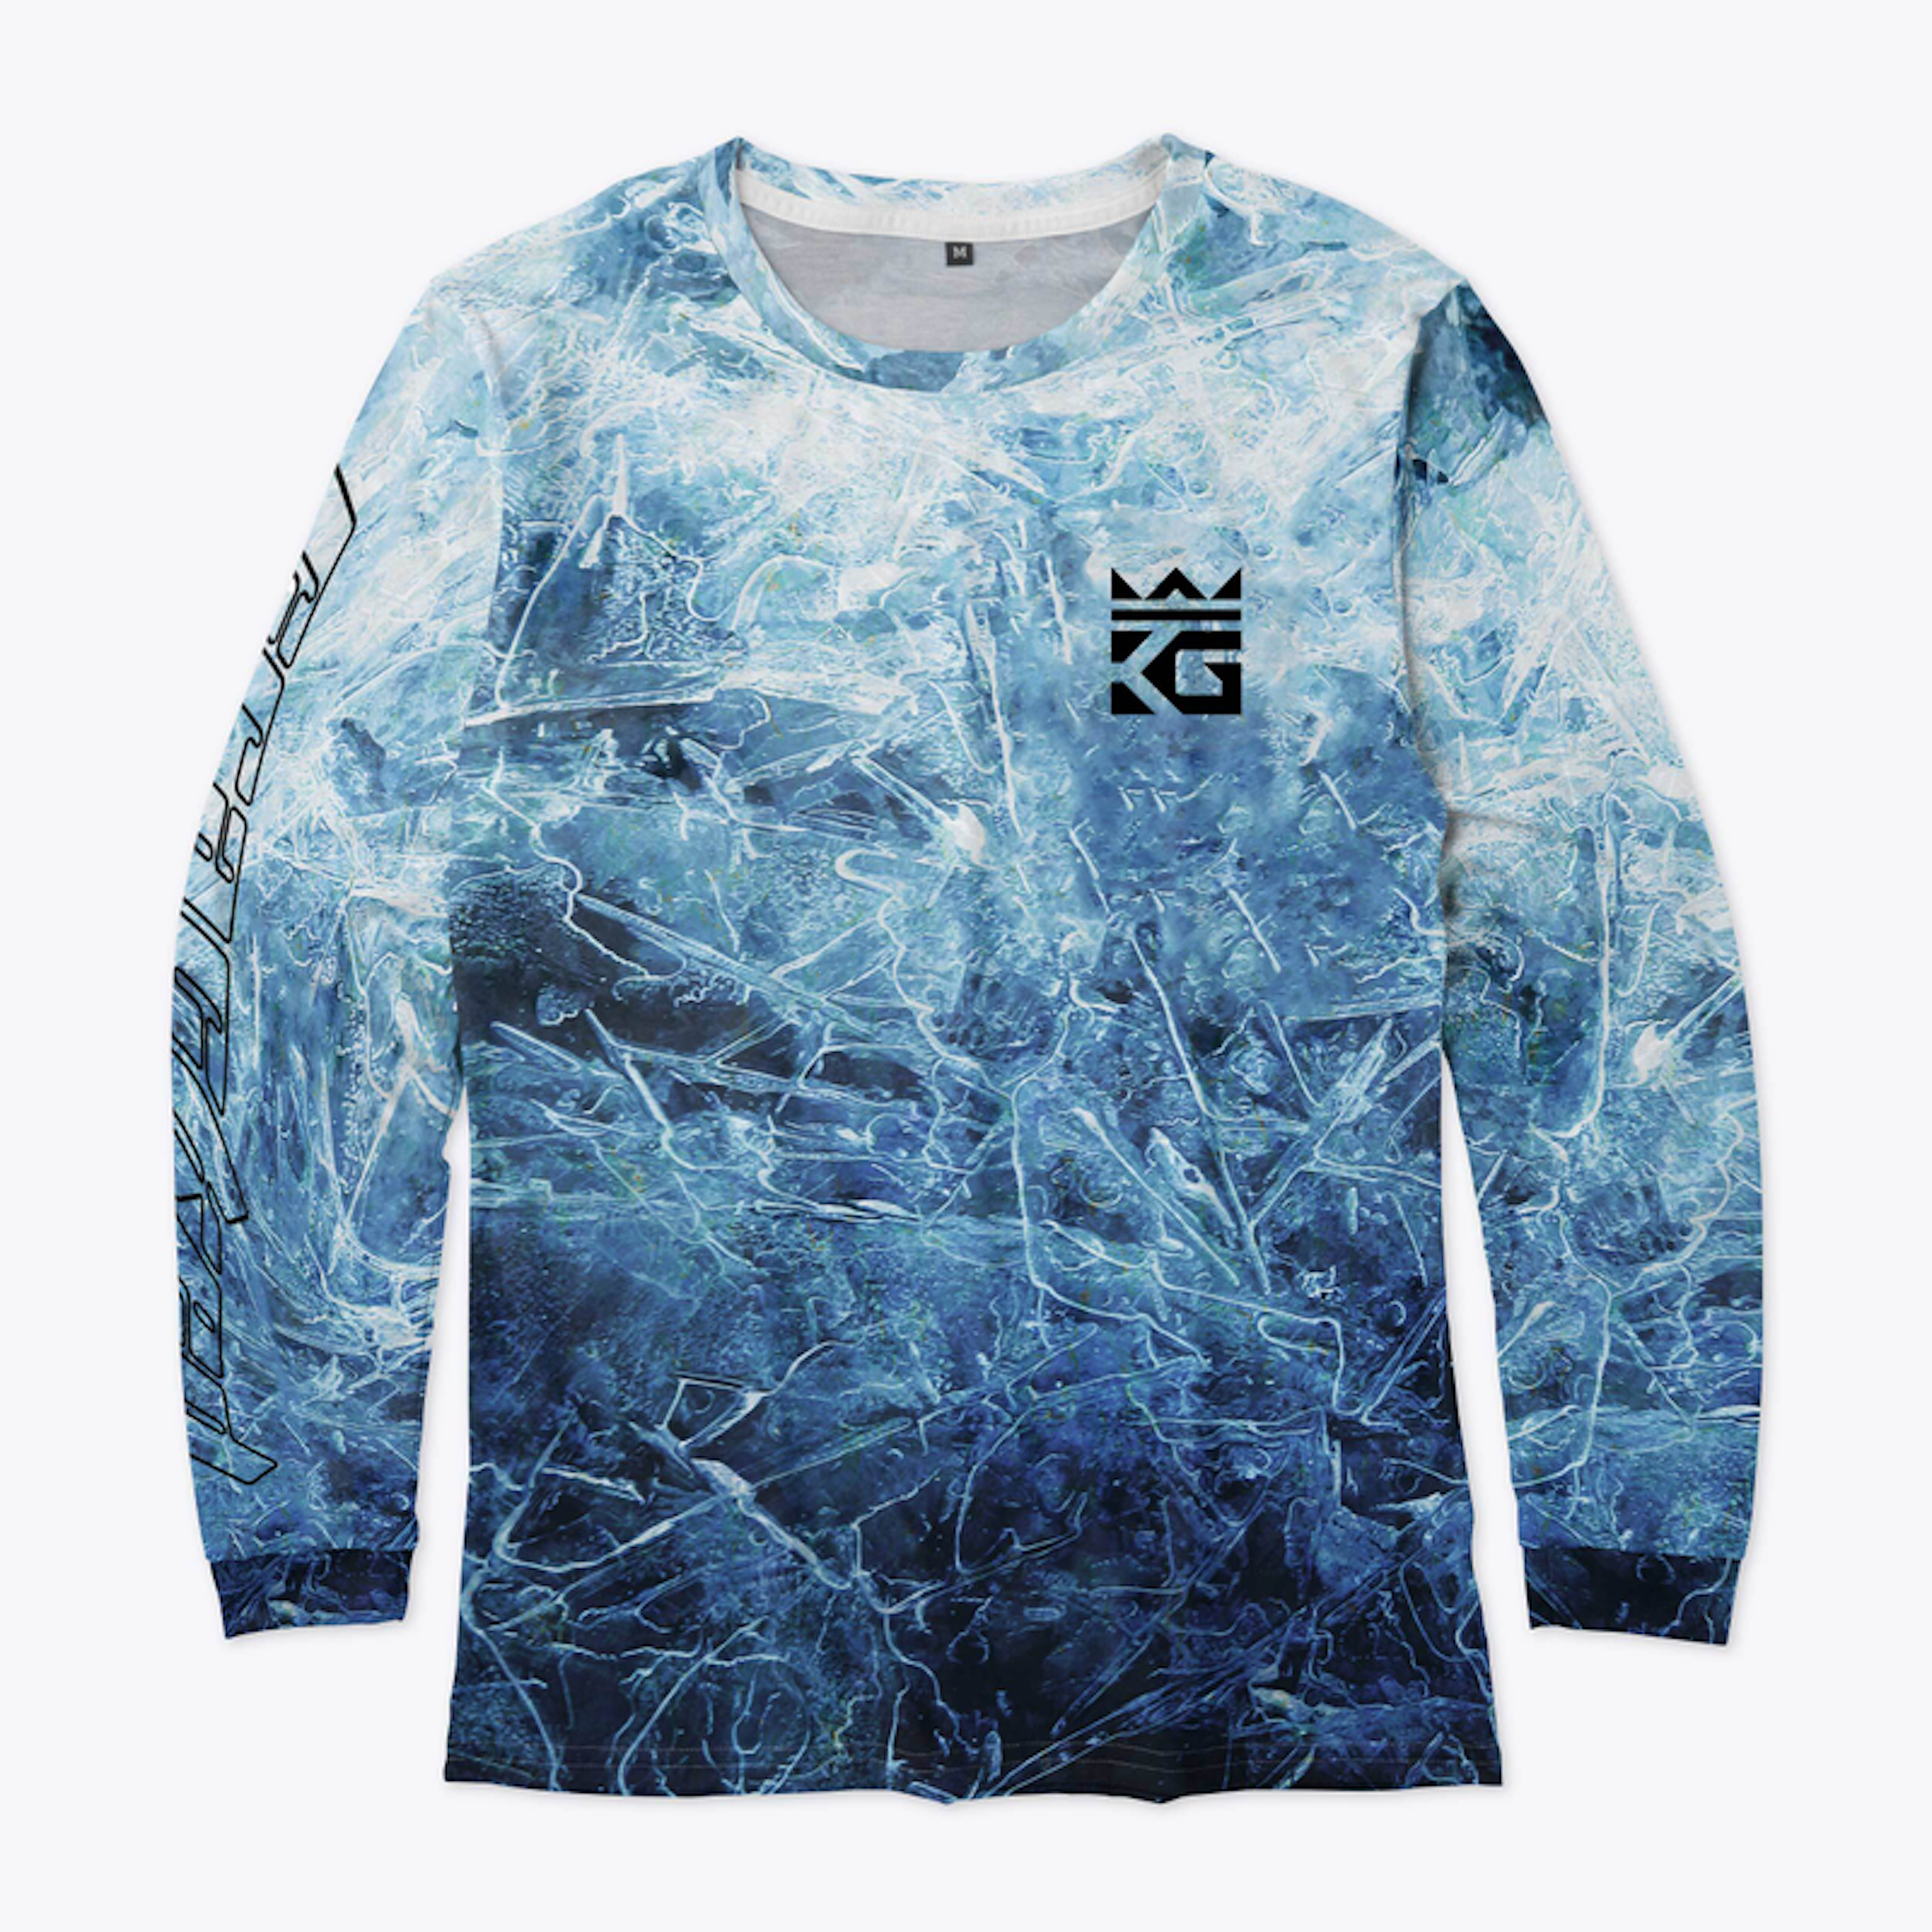 King George Black Ice Collection